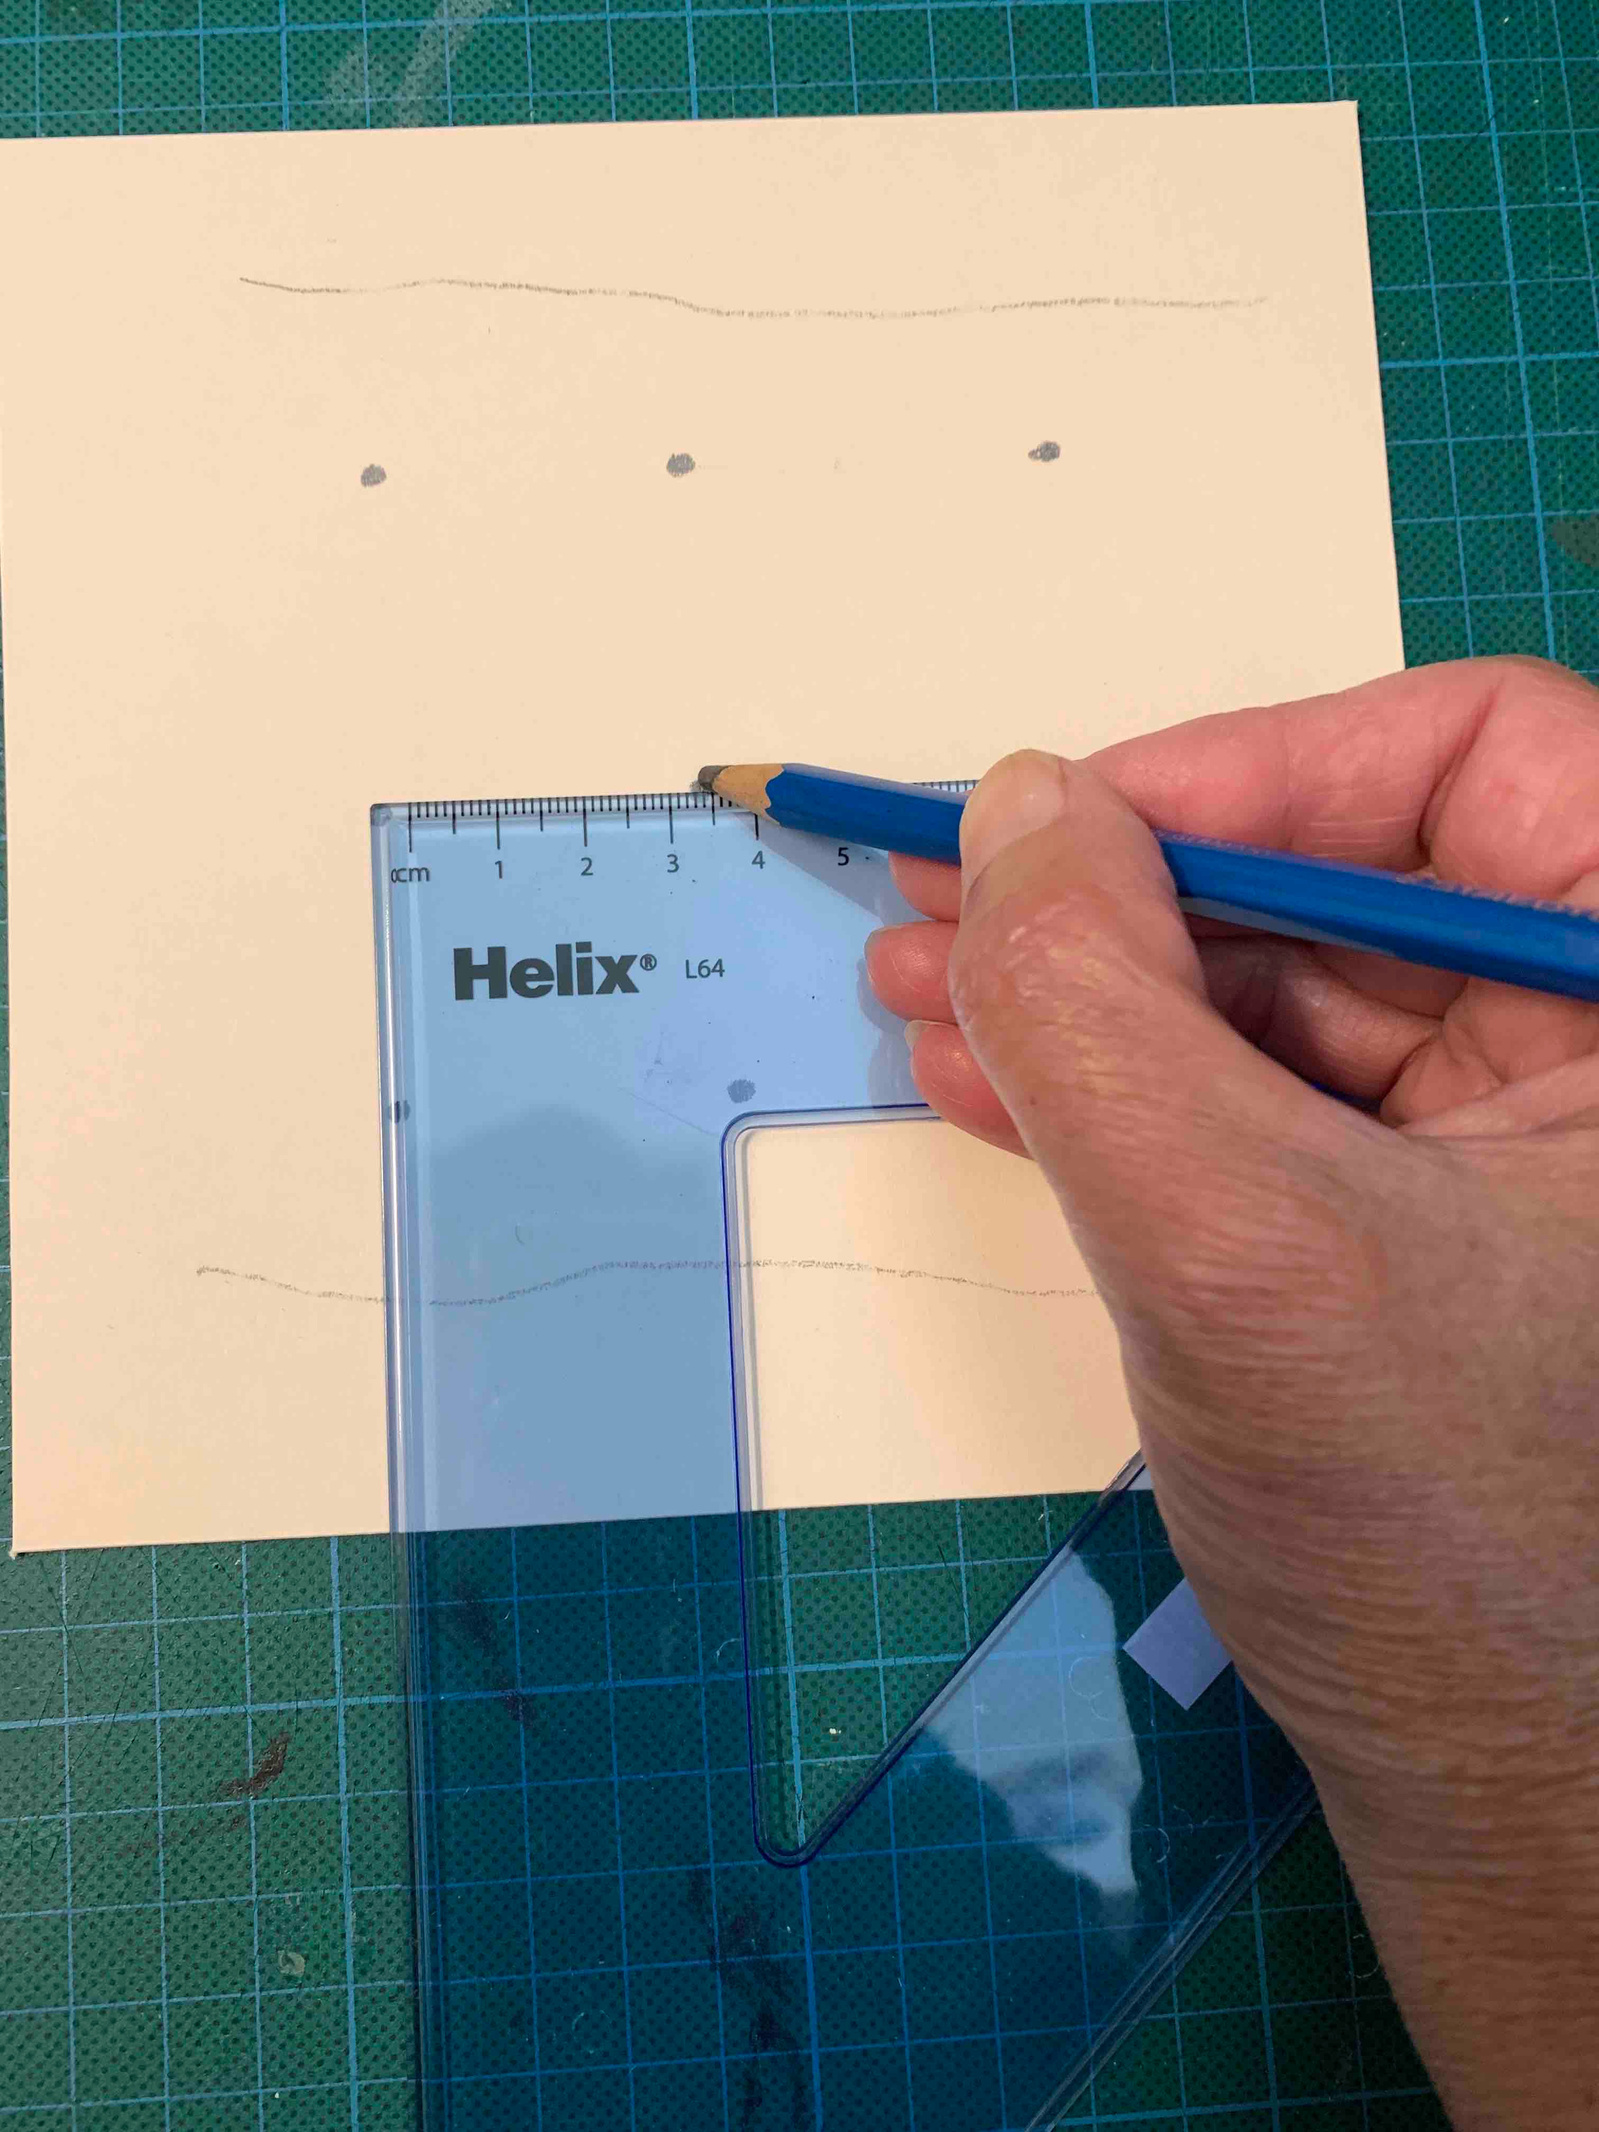 Use a set square to mark out the area where the holes will be punched